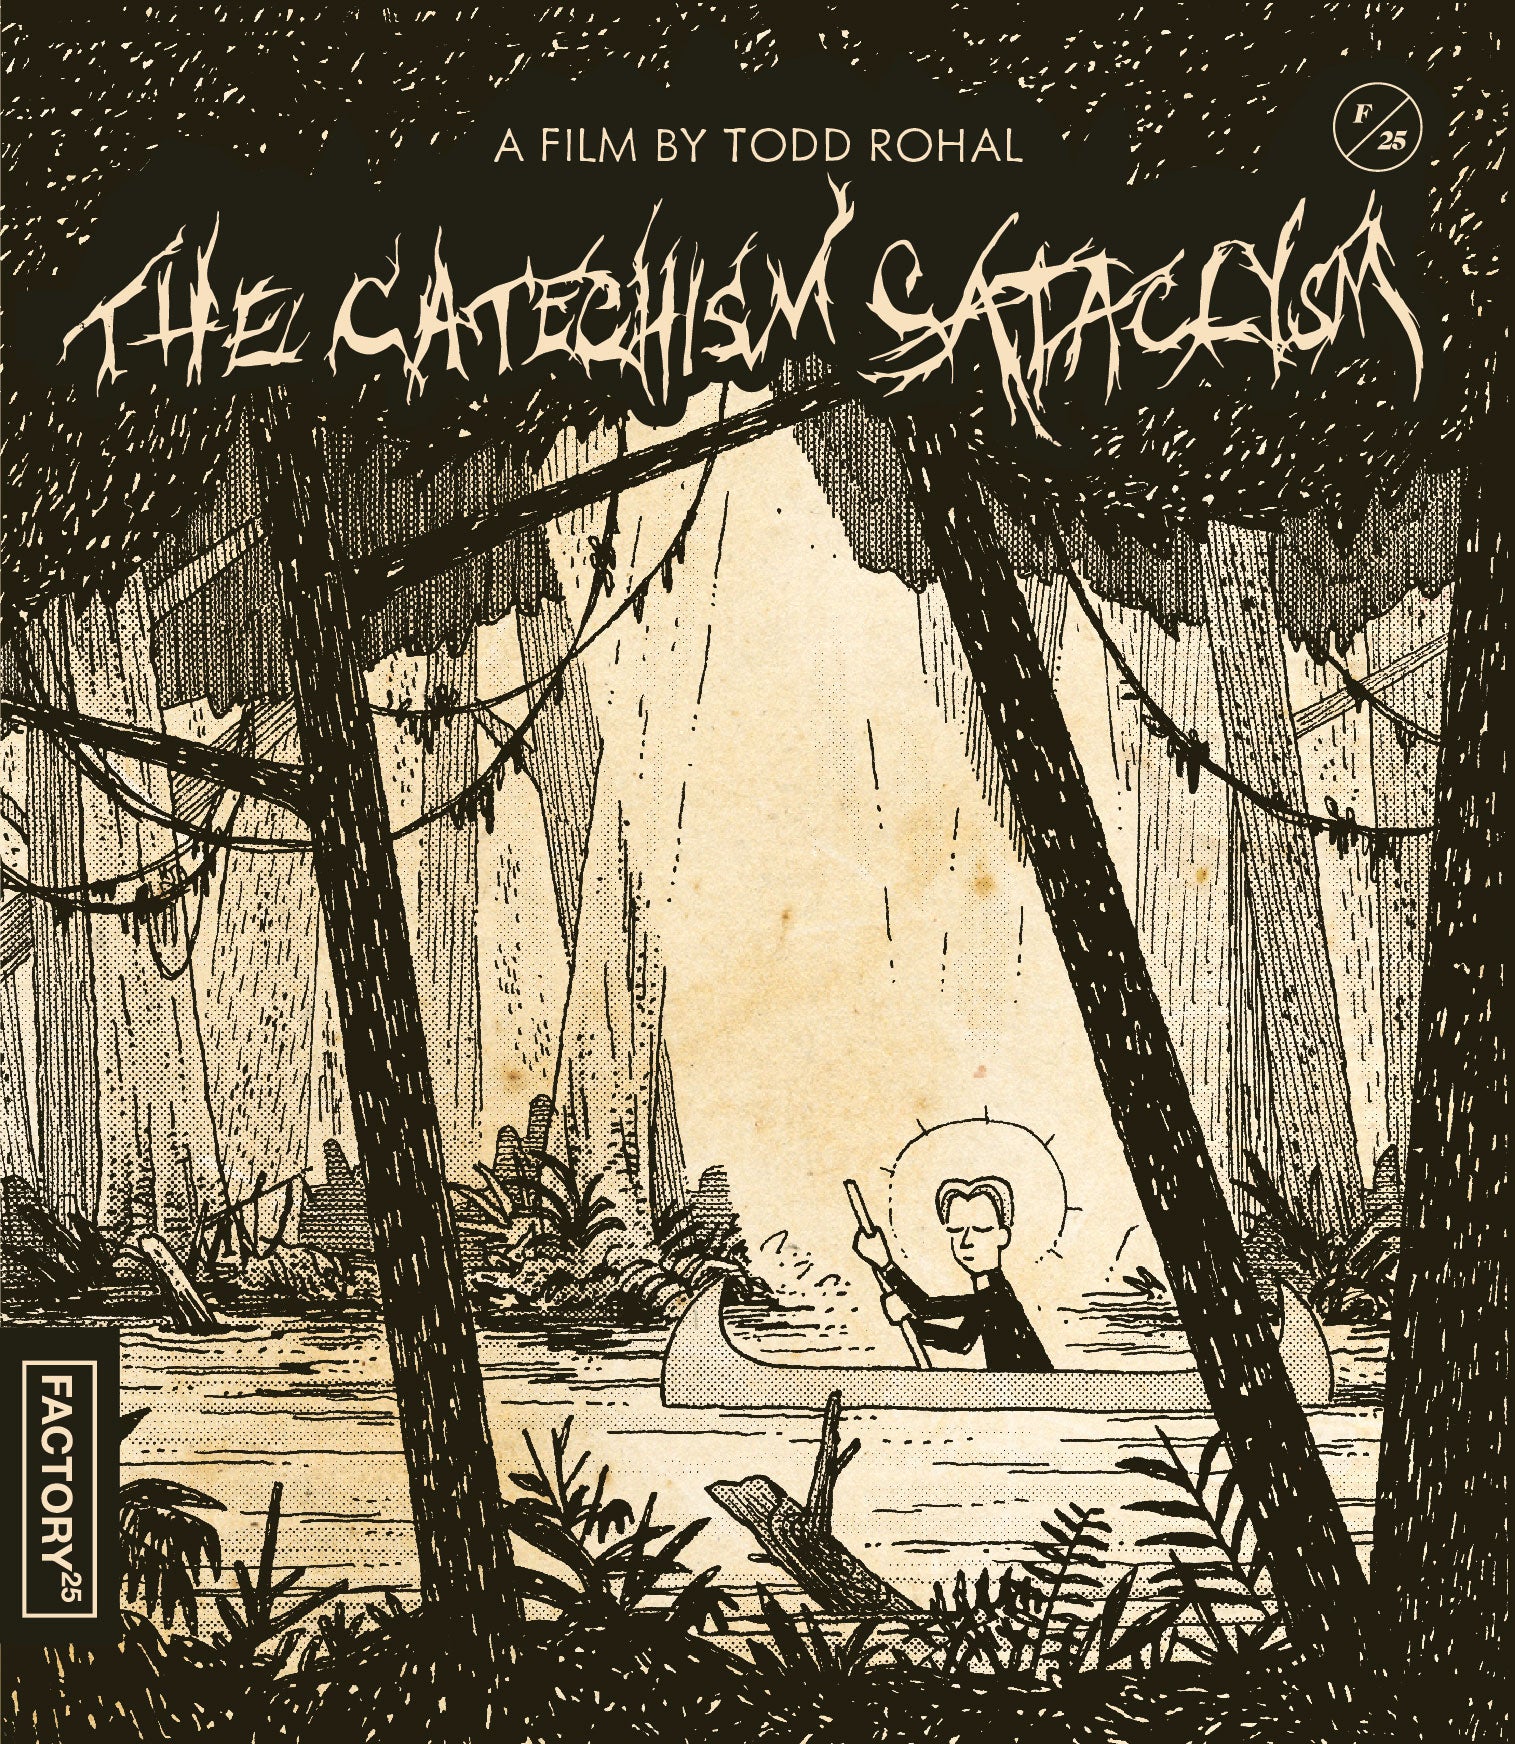 THE CATECHISM CATACLYSM (LIMITED EDITION) BLU-RAY